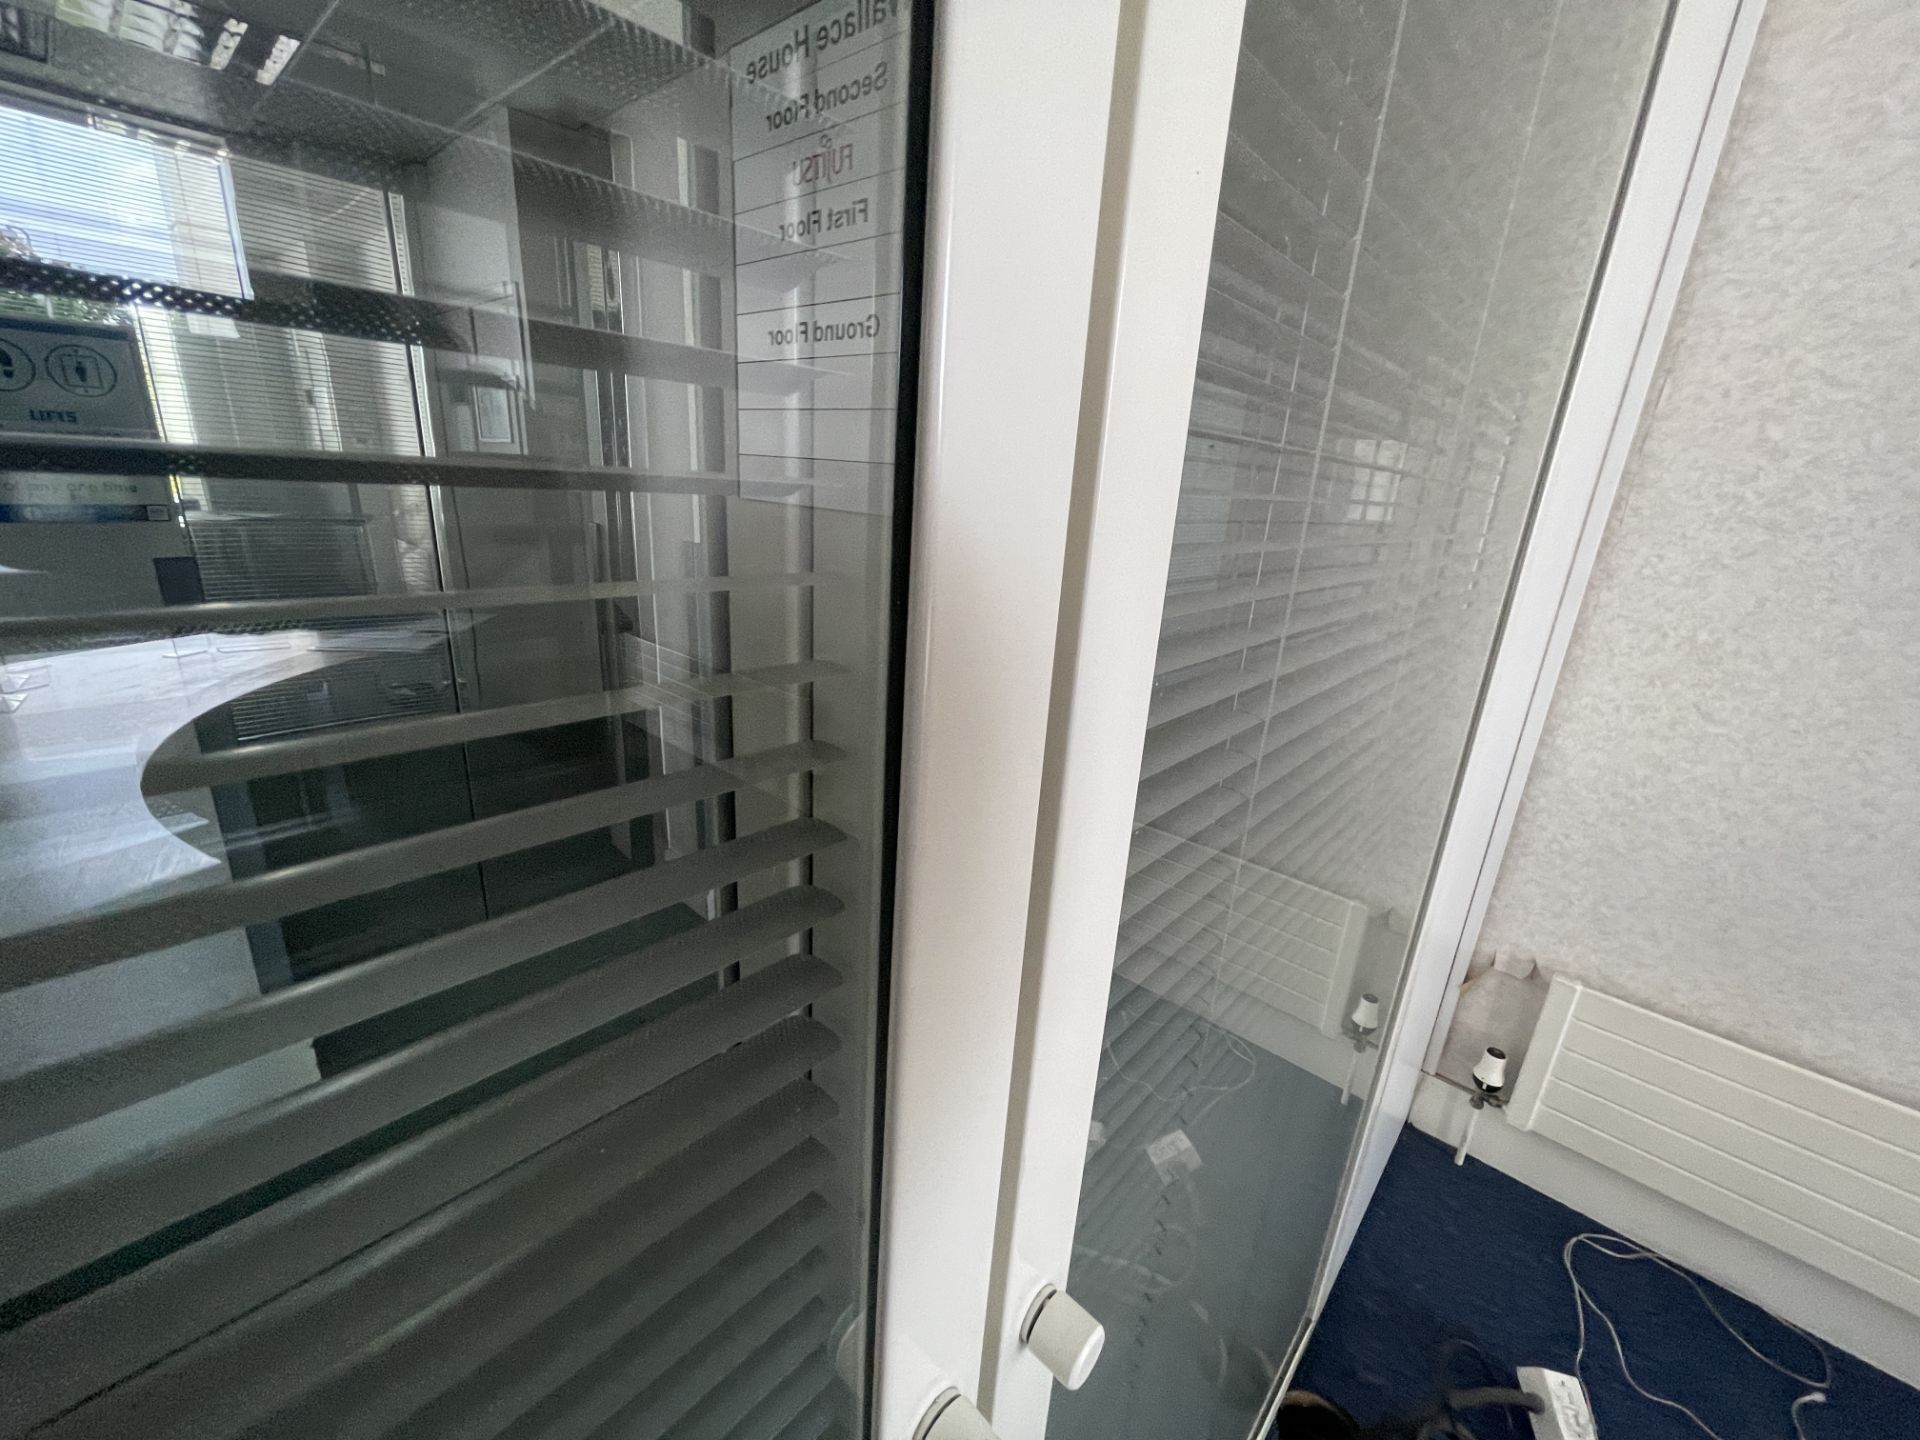 4 x Partition Panels With Privacy Blinds - Each Measures W265 x W100cm - Ref: ED157 - To Be Removed - Image 5 of 13